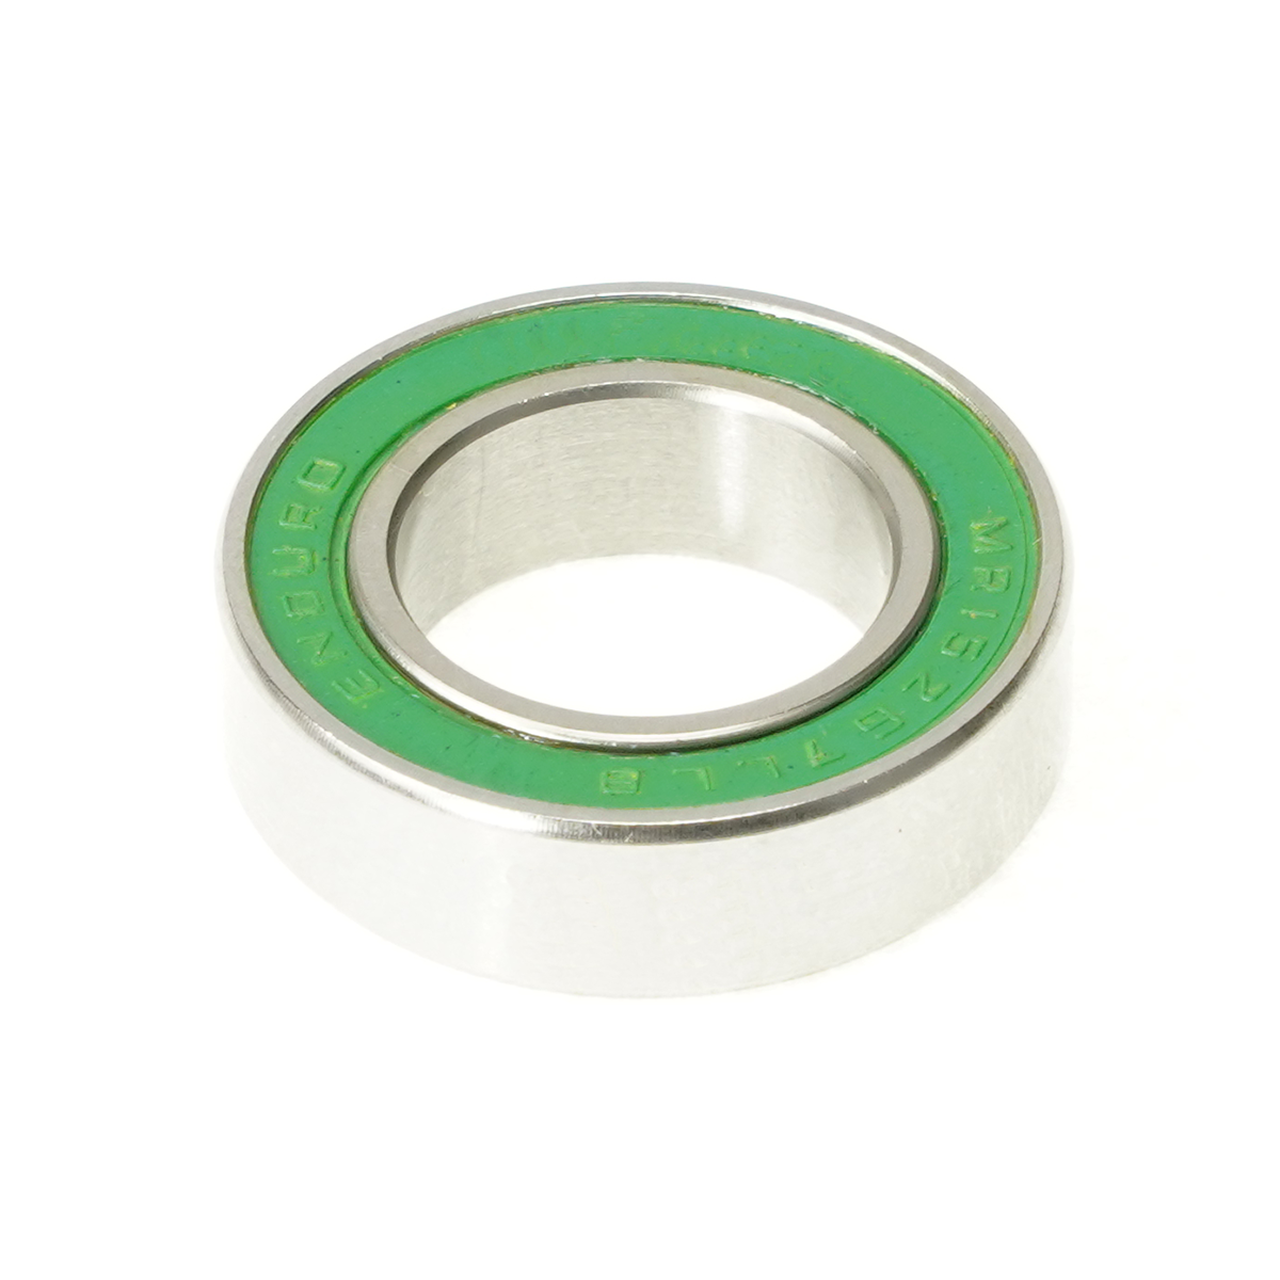 Enduro SMR 15267 LLB - Stainless Steel Radial Bearing (C3 Clearance) - 15mm x 26mm x 7mm